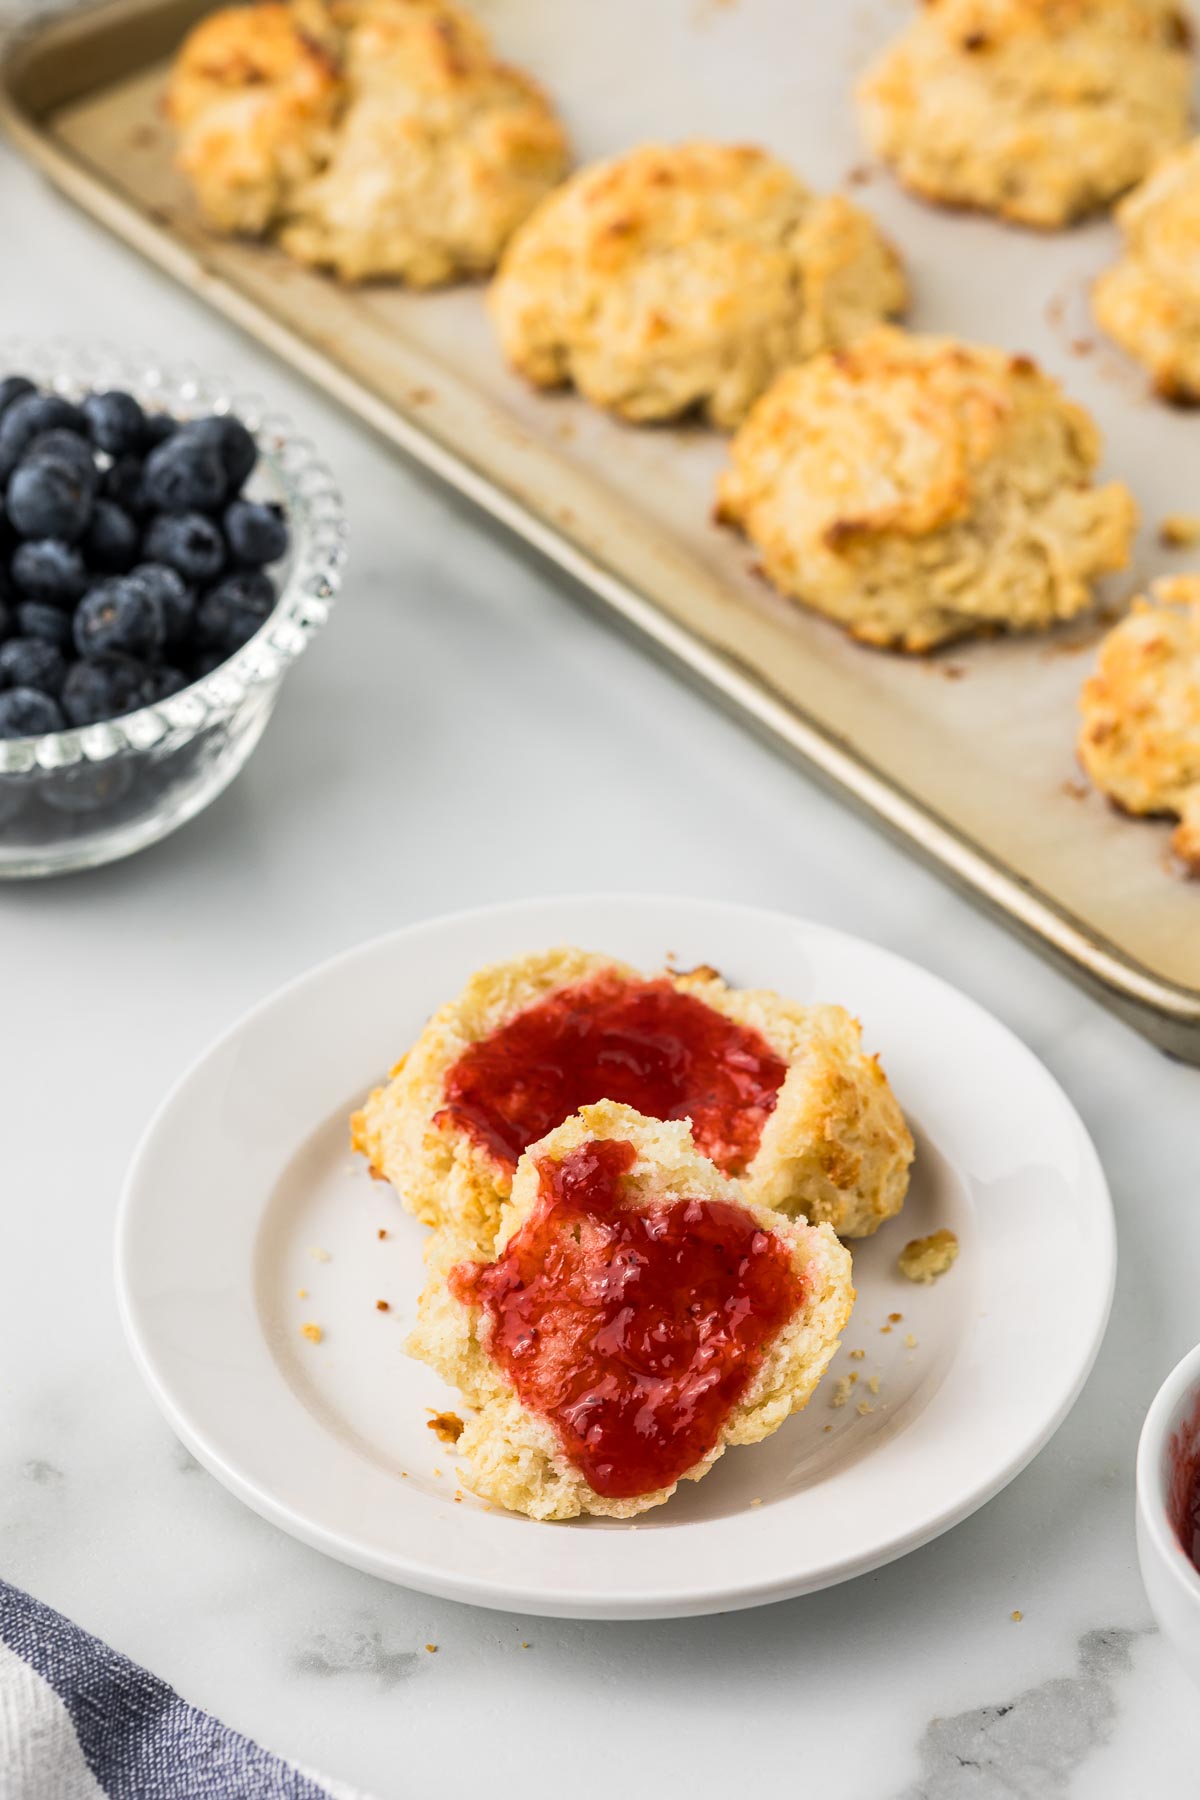 Buttermilk biscuits on a parchment paper lined cookie sheet, bowl or blueberries, a biscuit with strawberry jam